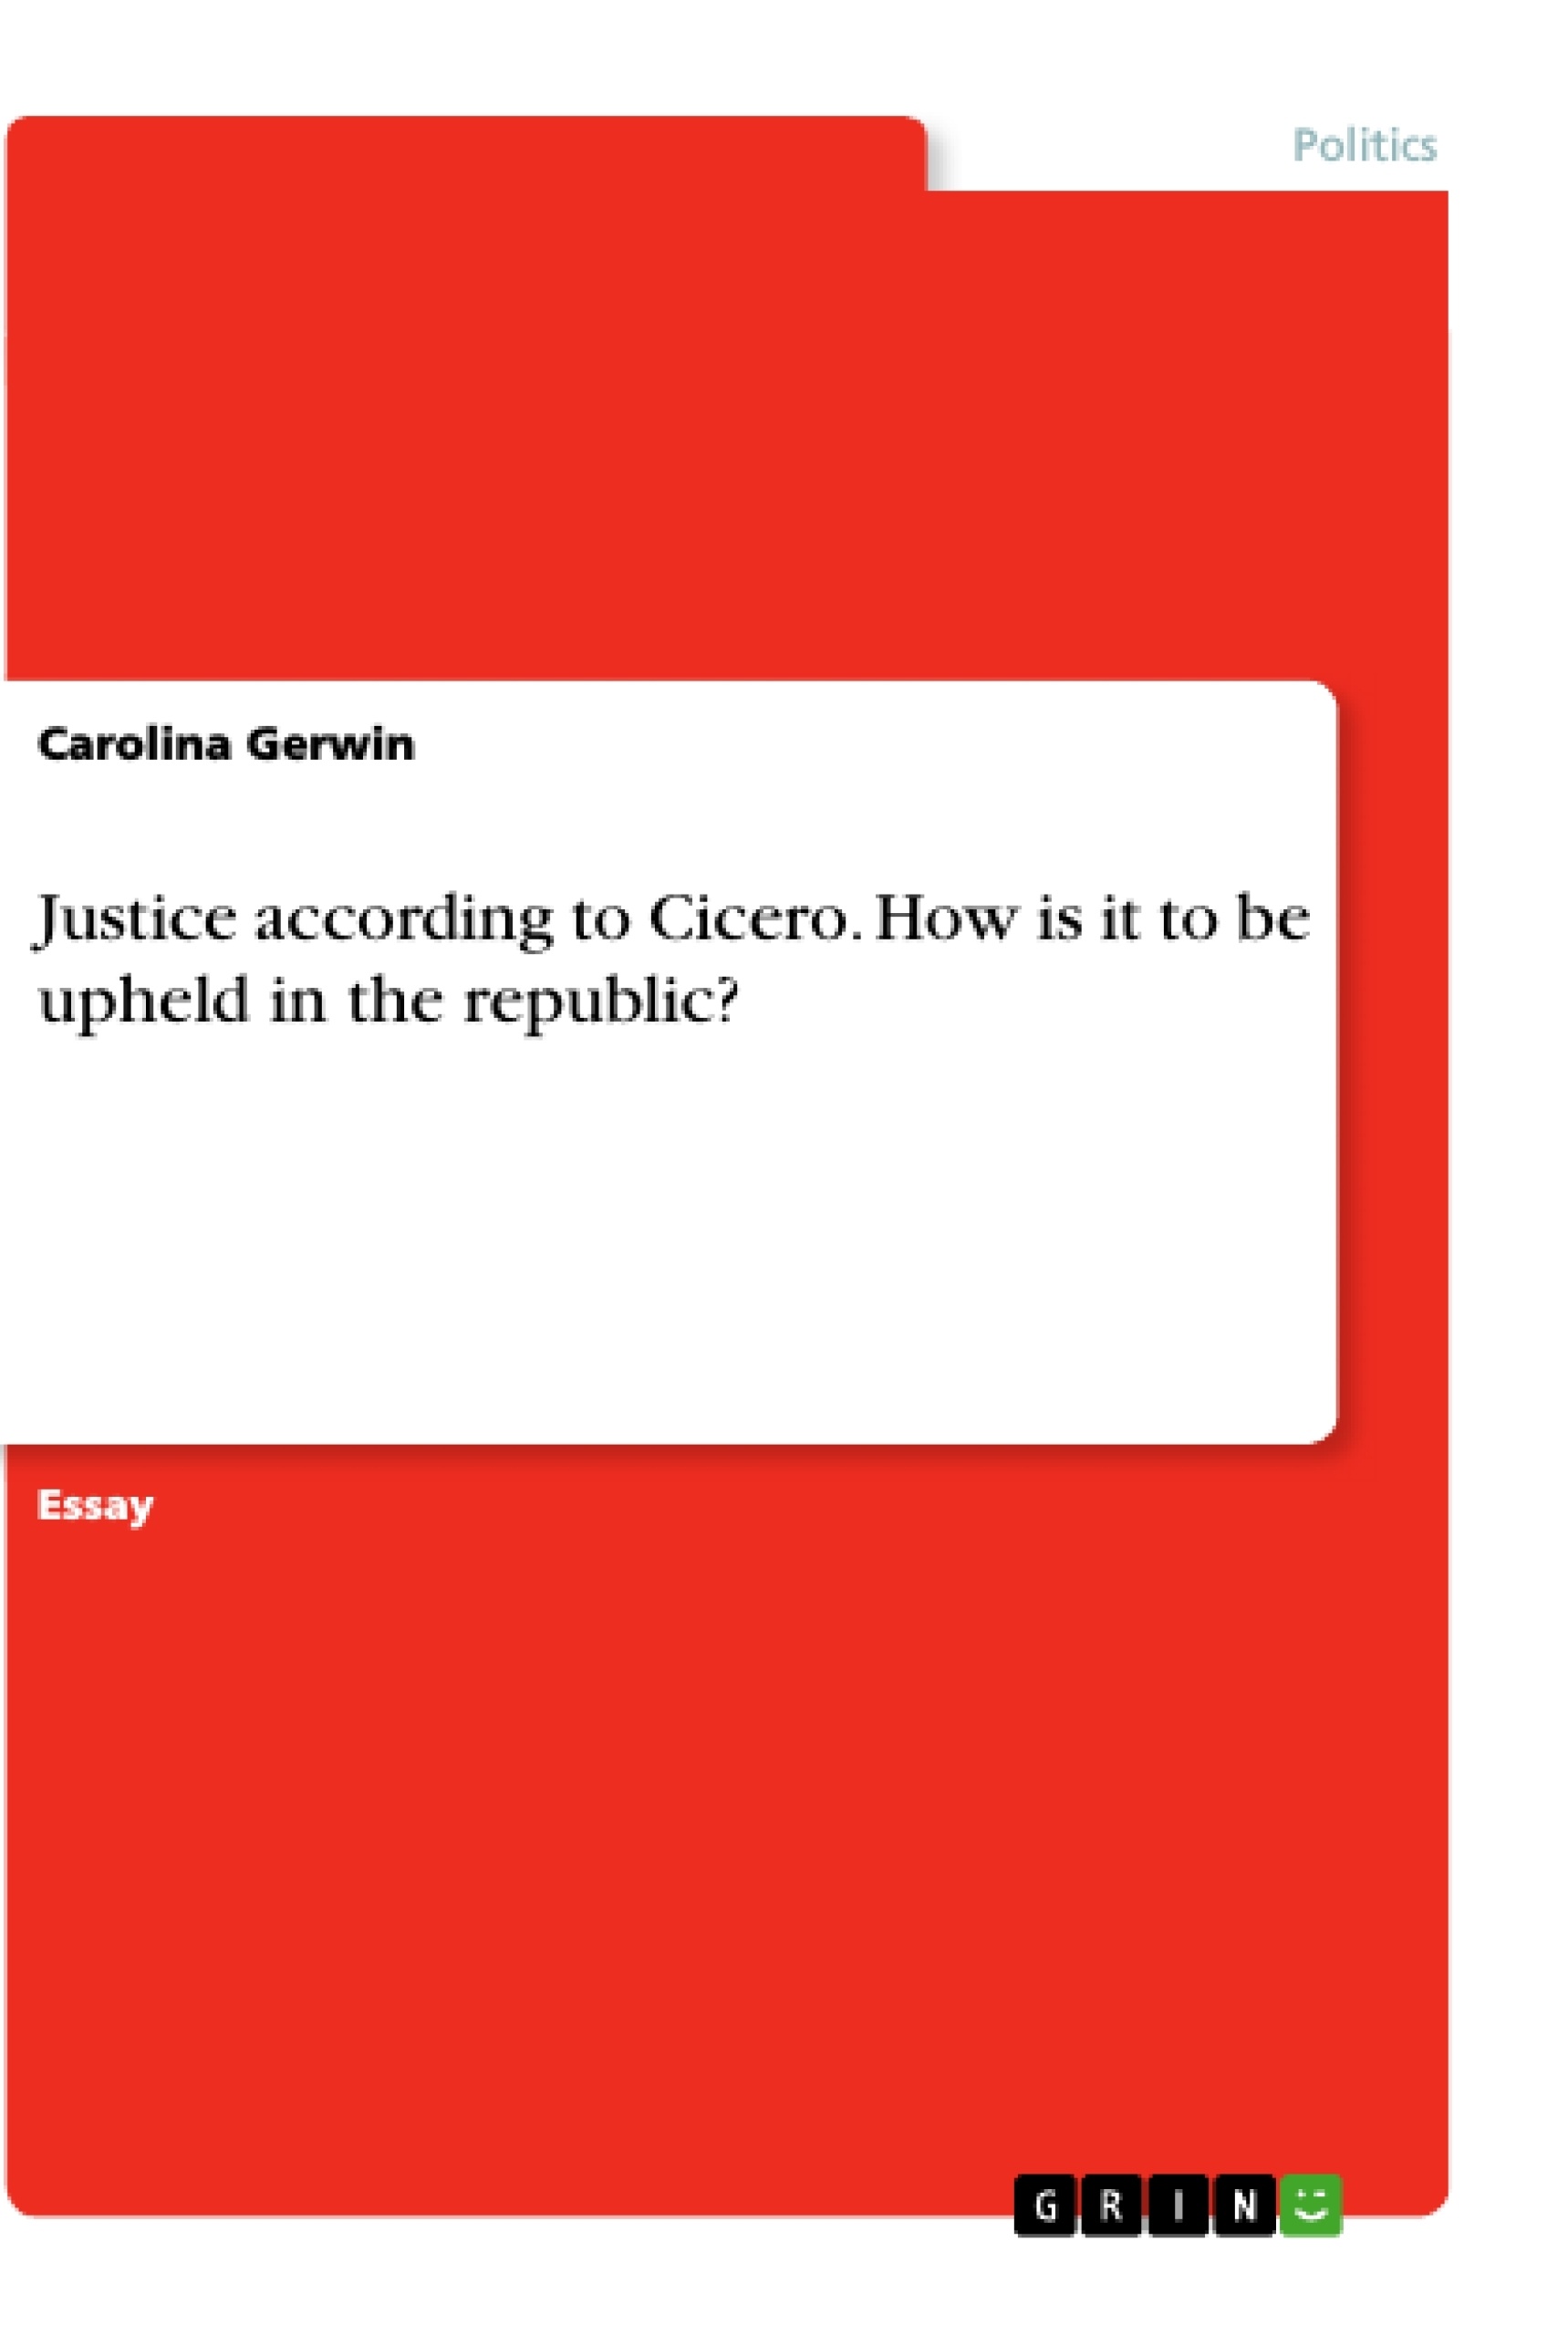 Title: Justice according to Cicero. How is it to be upheld in the republic?